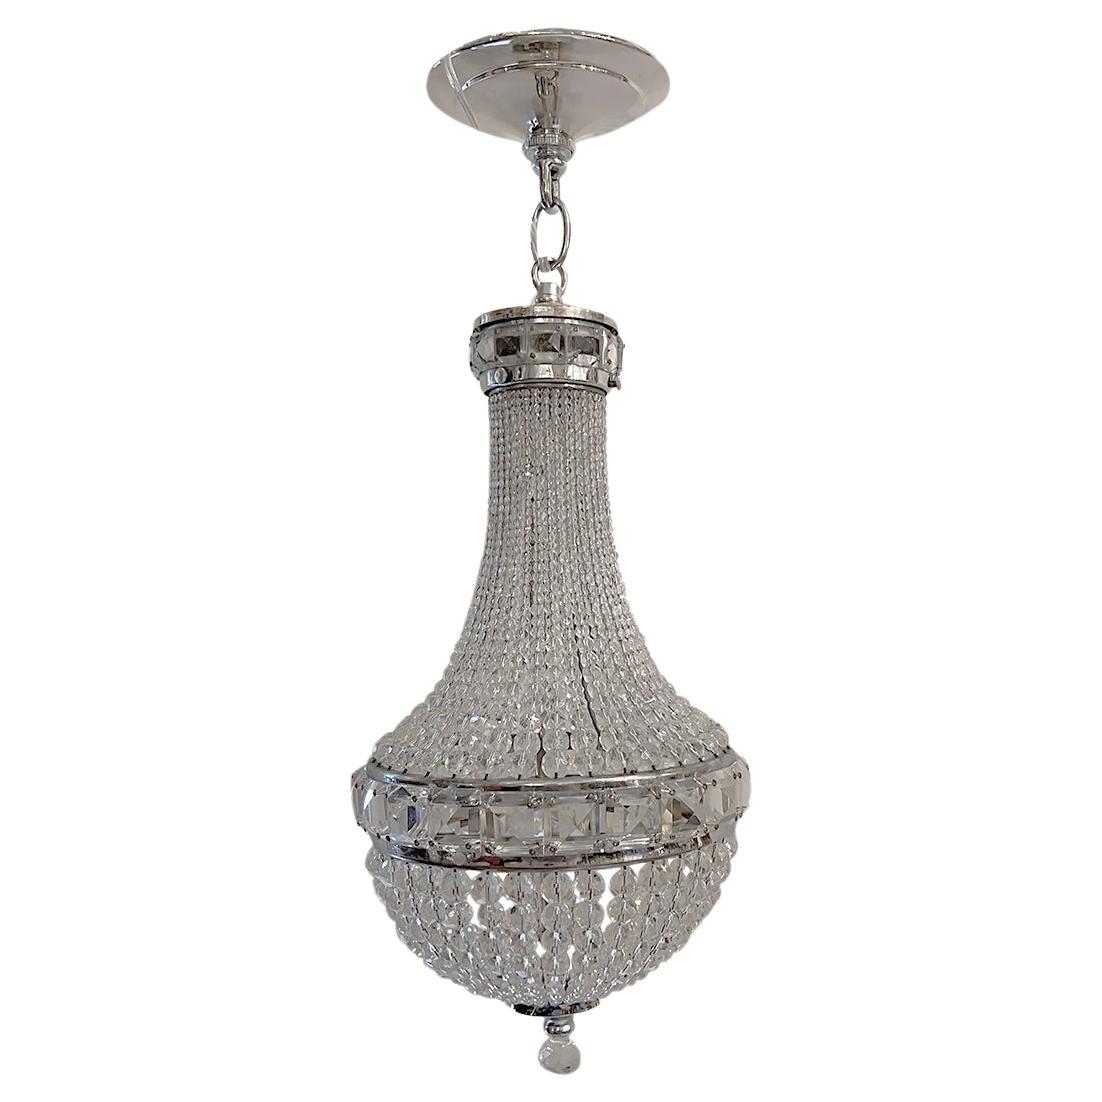 Antique Beaded Crystal Lantern For Sale